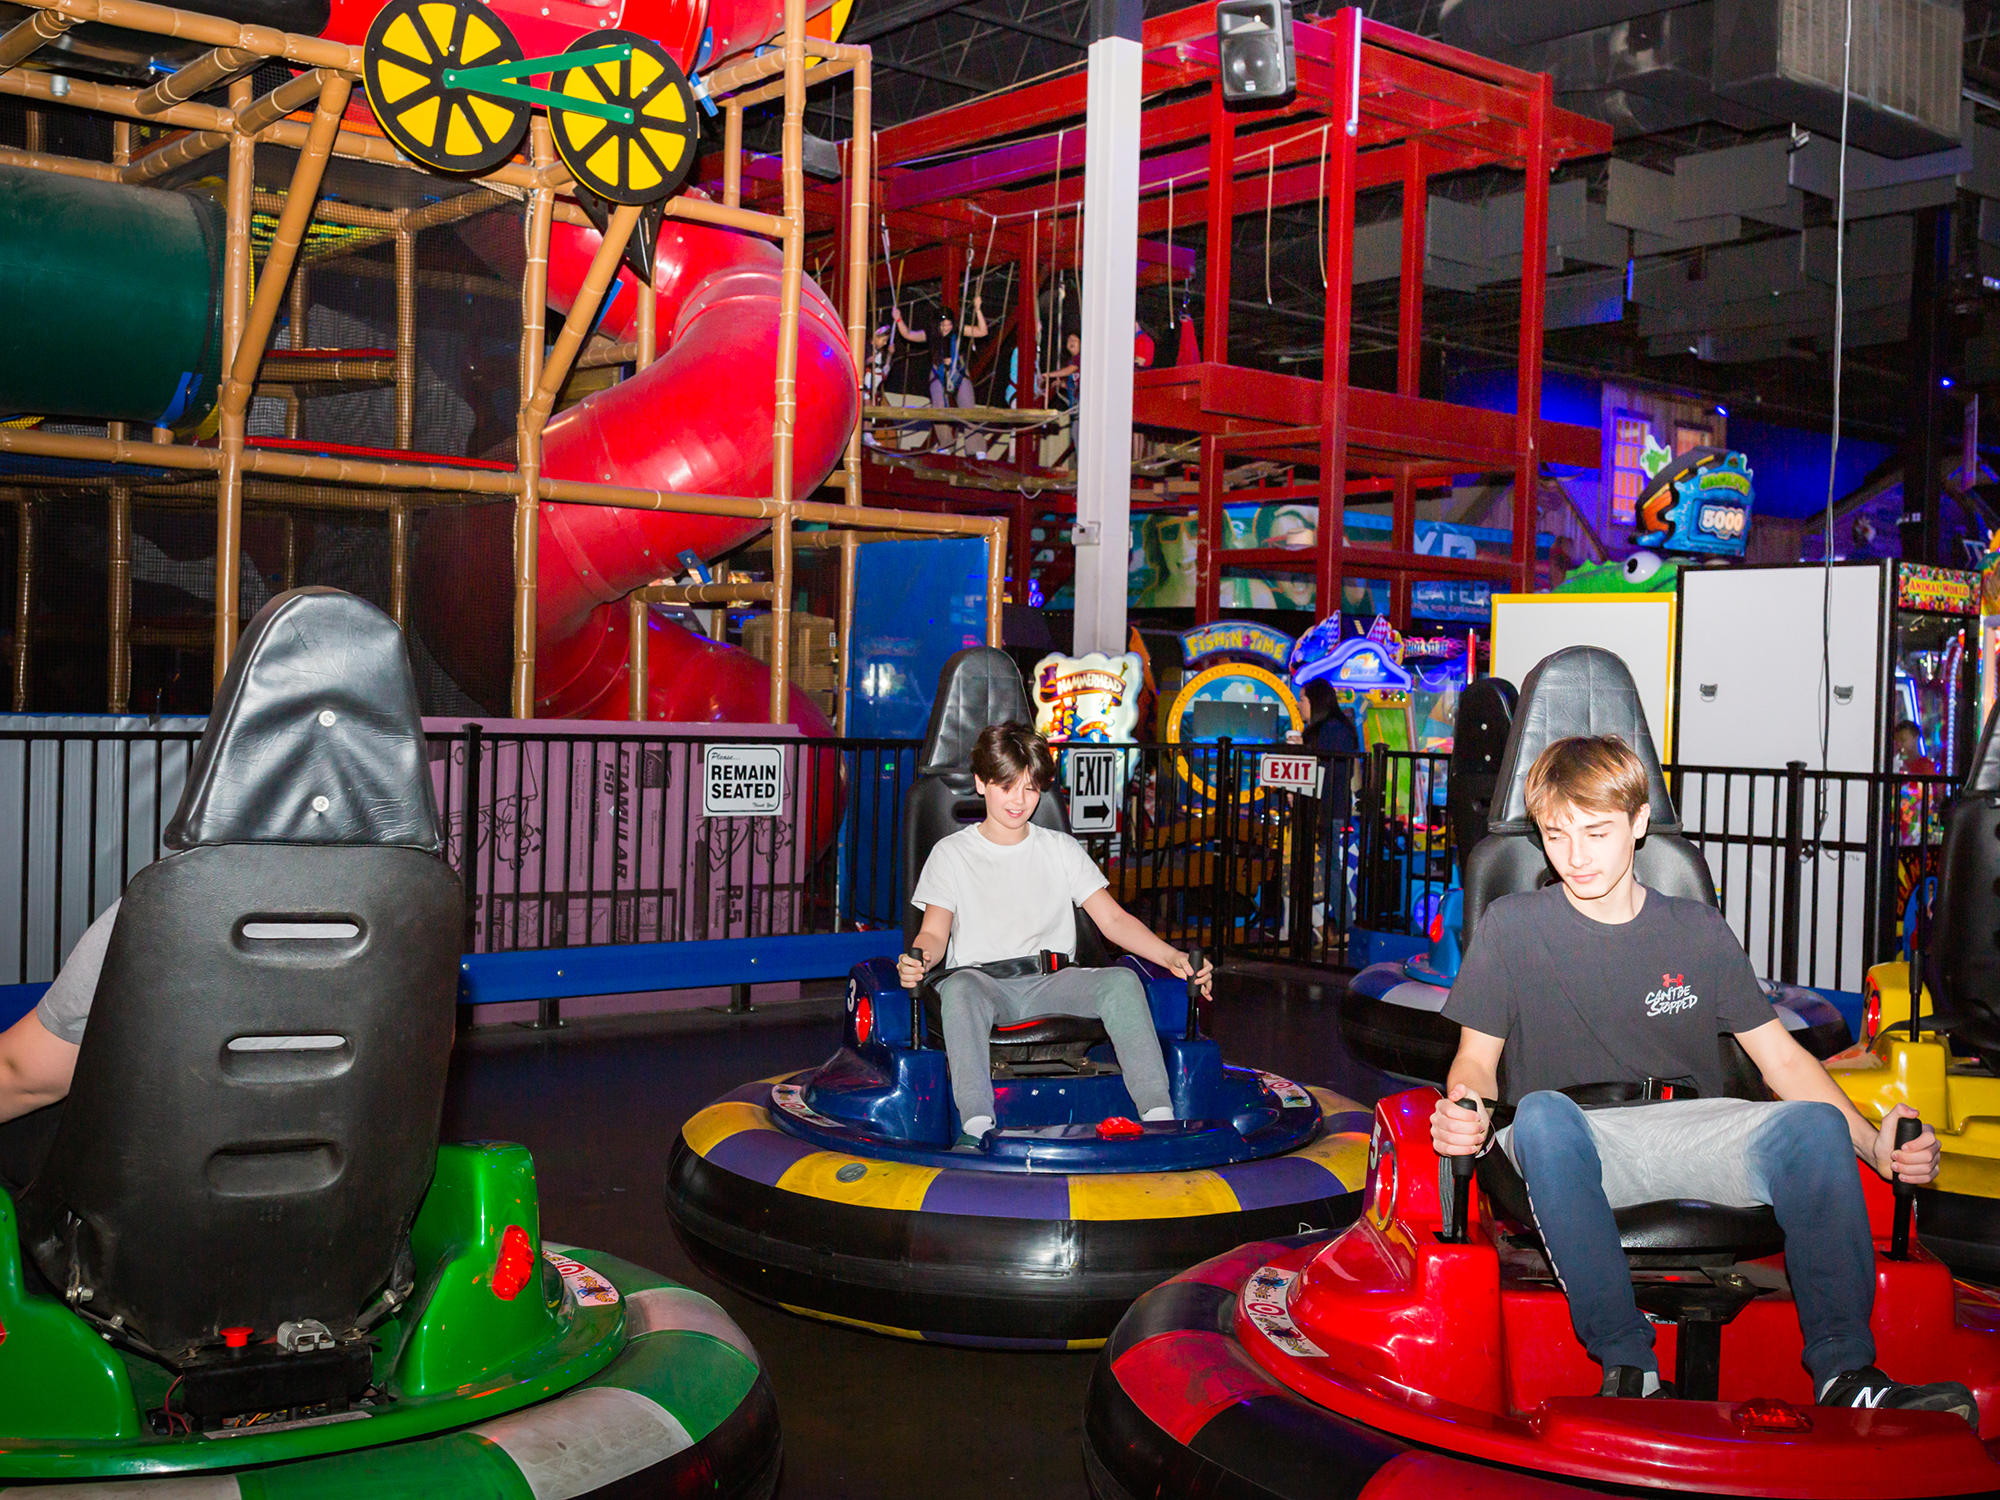 Adventure City: The Little Theme Park That Is Big On Family Fun